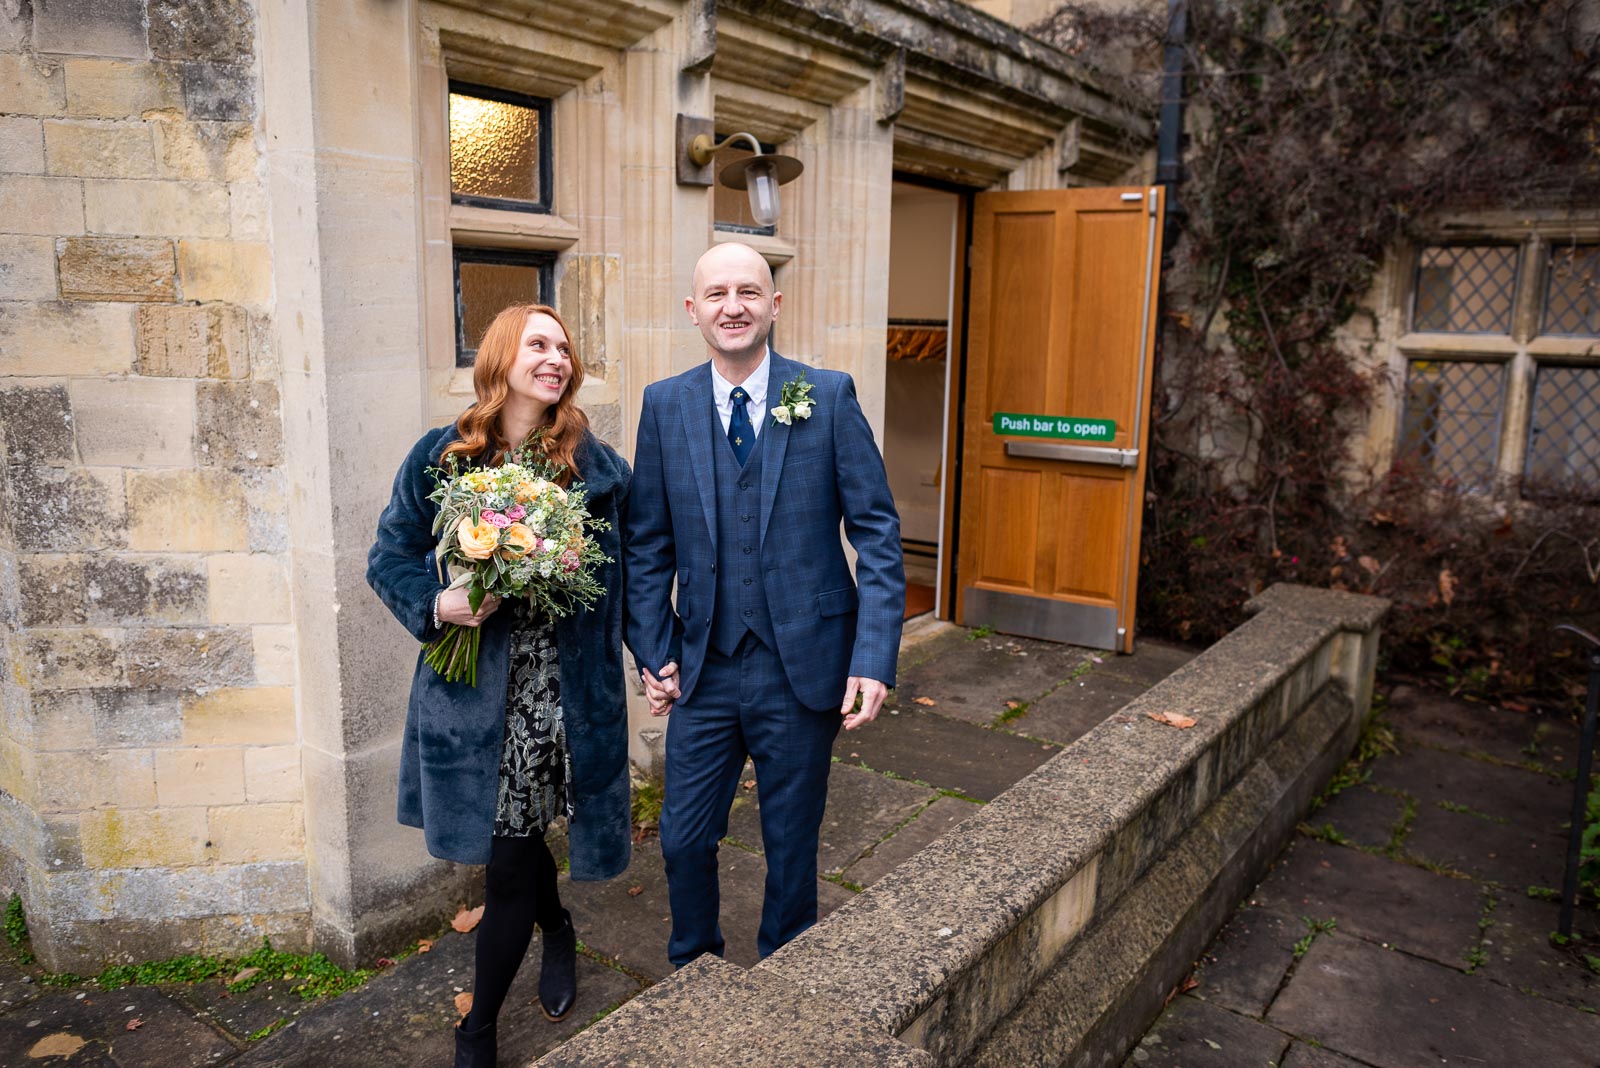 Melanie  and Ryan arrive in Southover Grange after their wedding at Lewes Register Office.